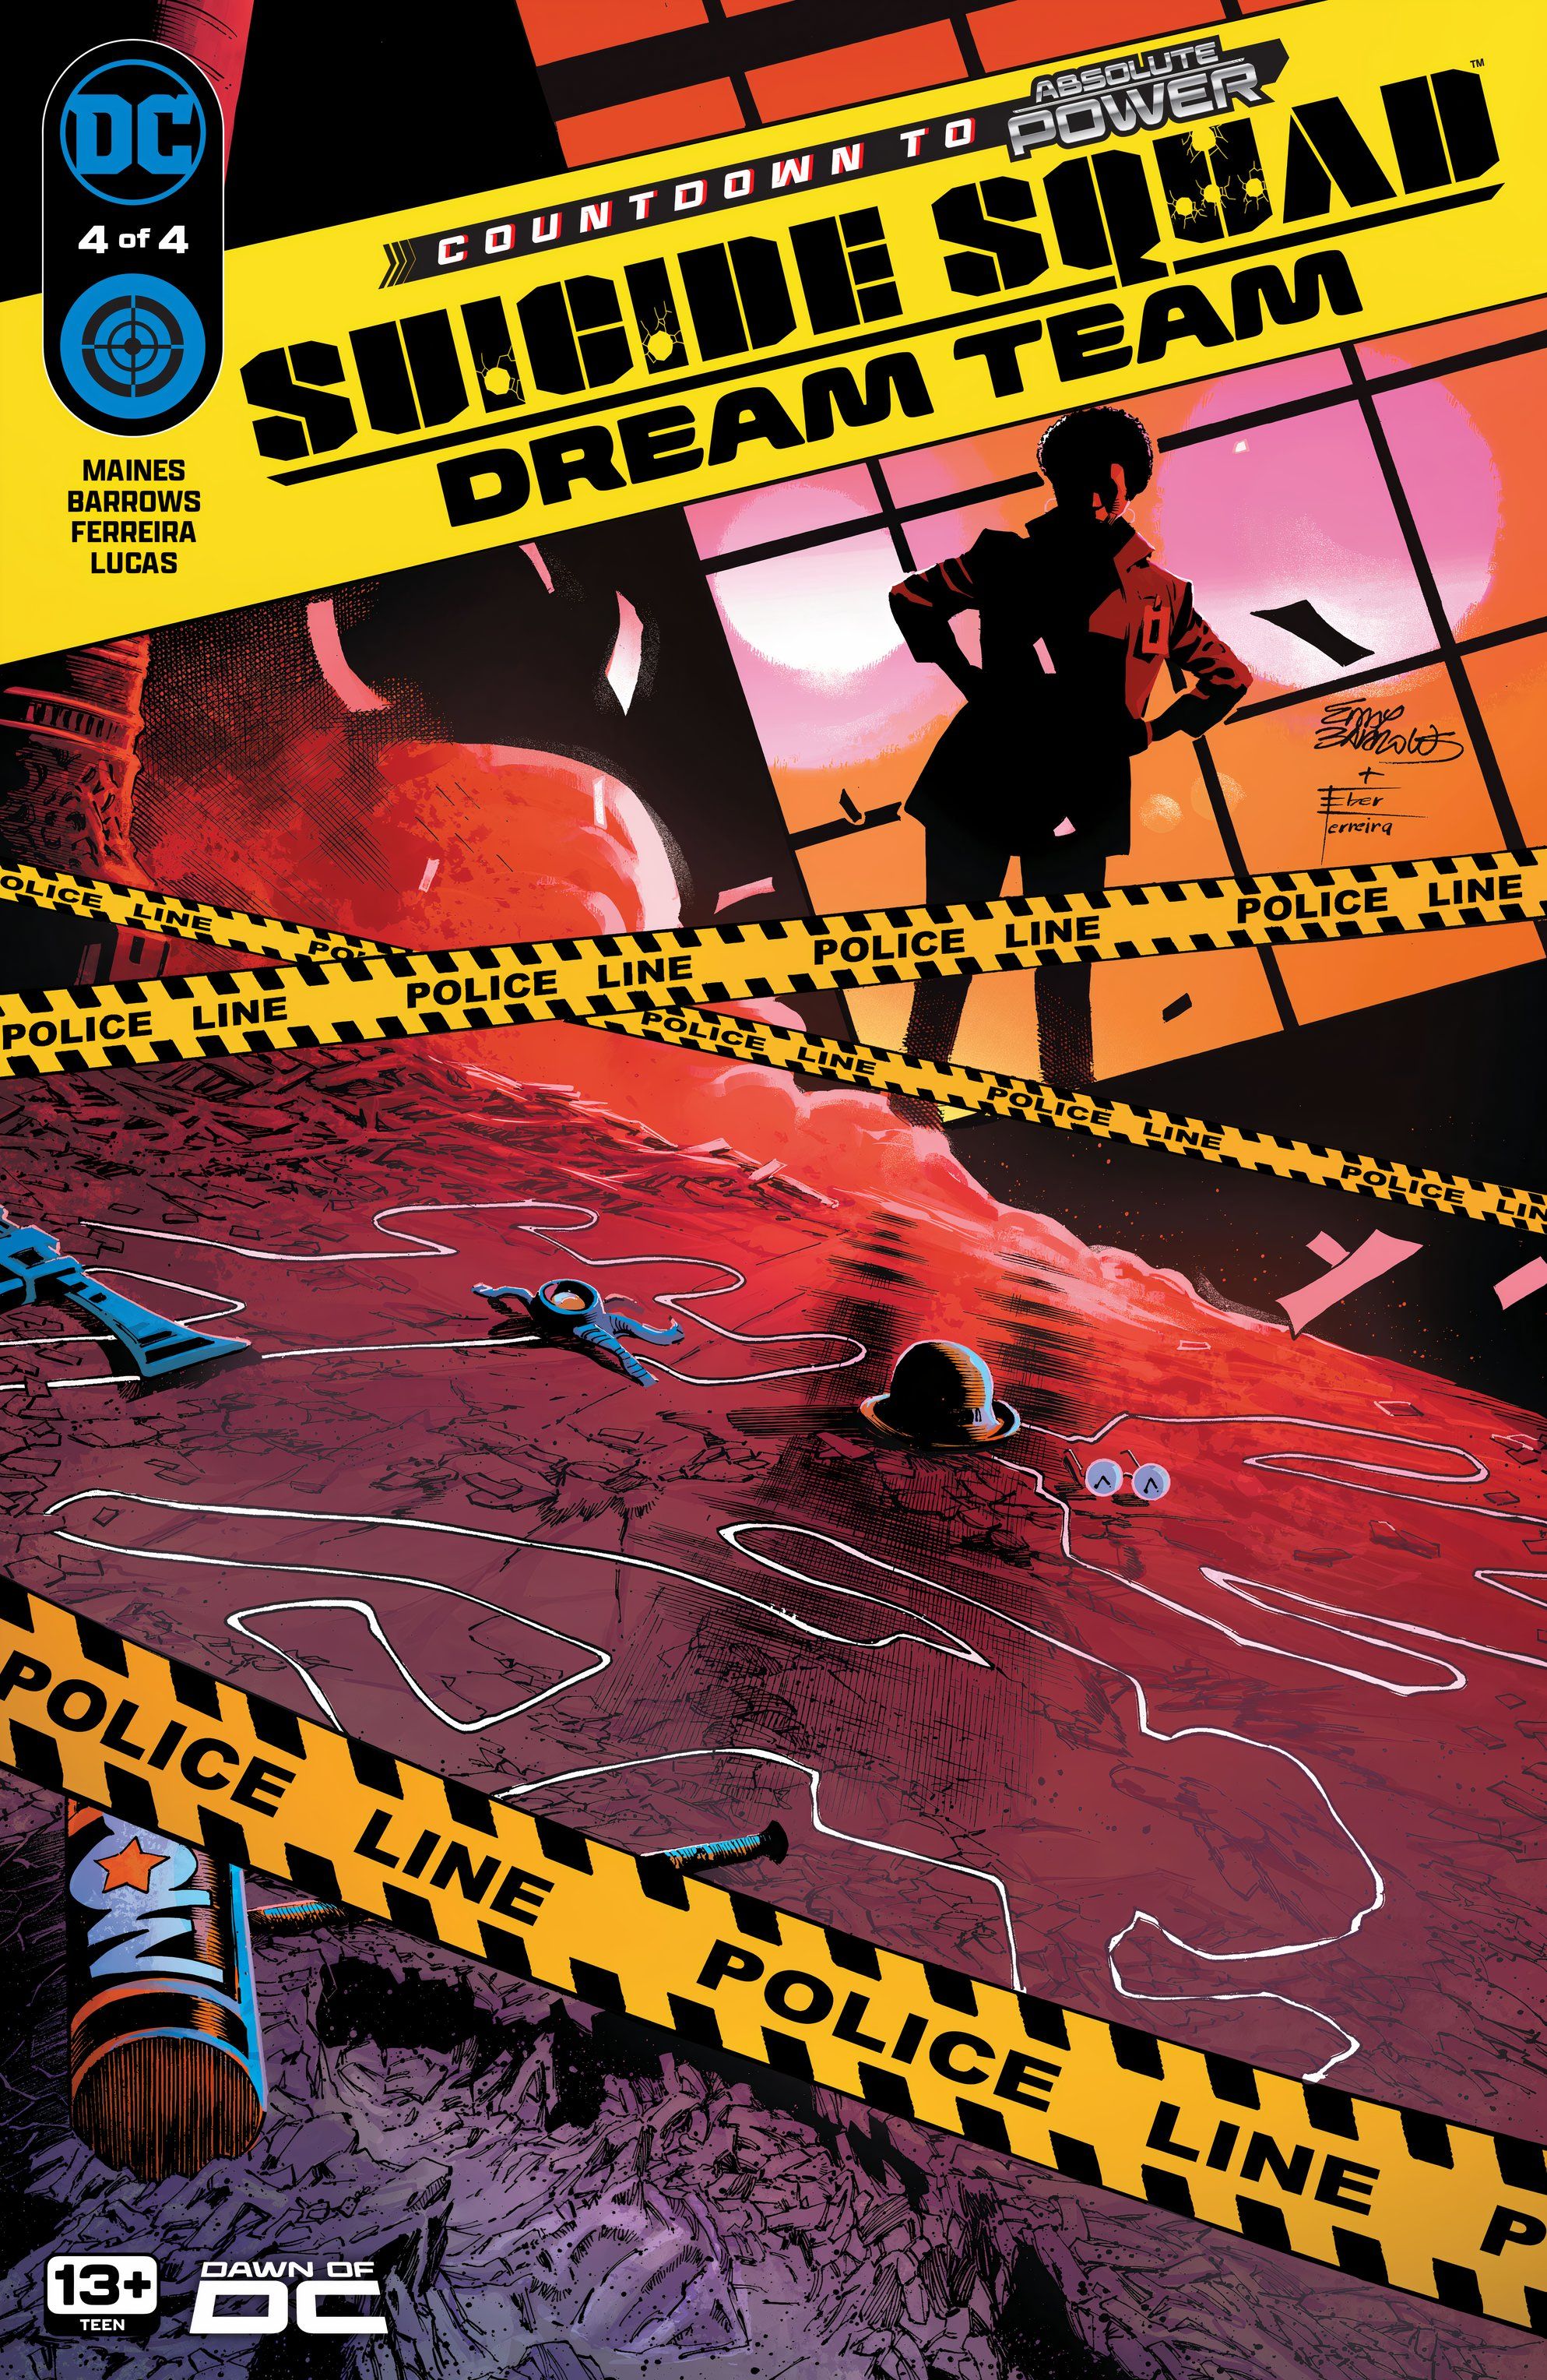 Suicide Squad Dream Team 4 Main Cover: Amanda Waller looks at evidence in a crime scene with police tape.